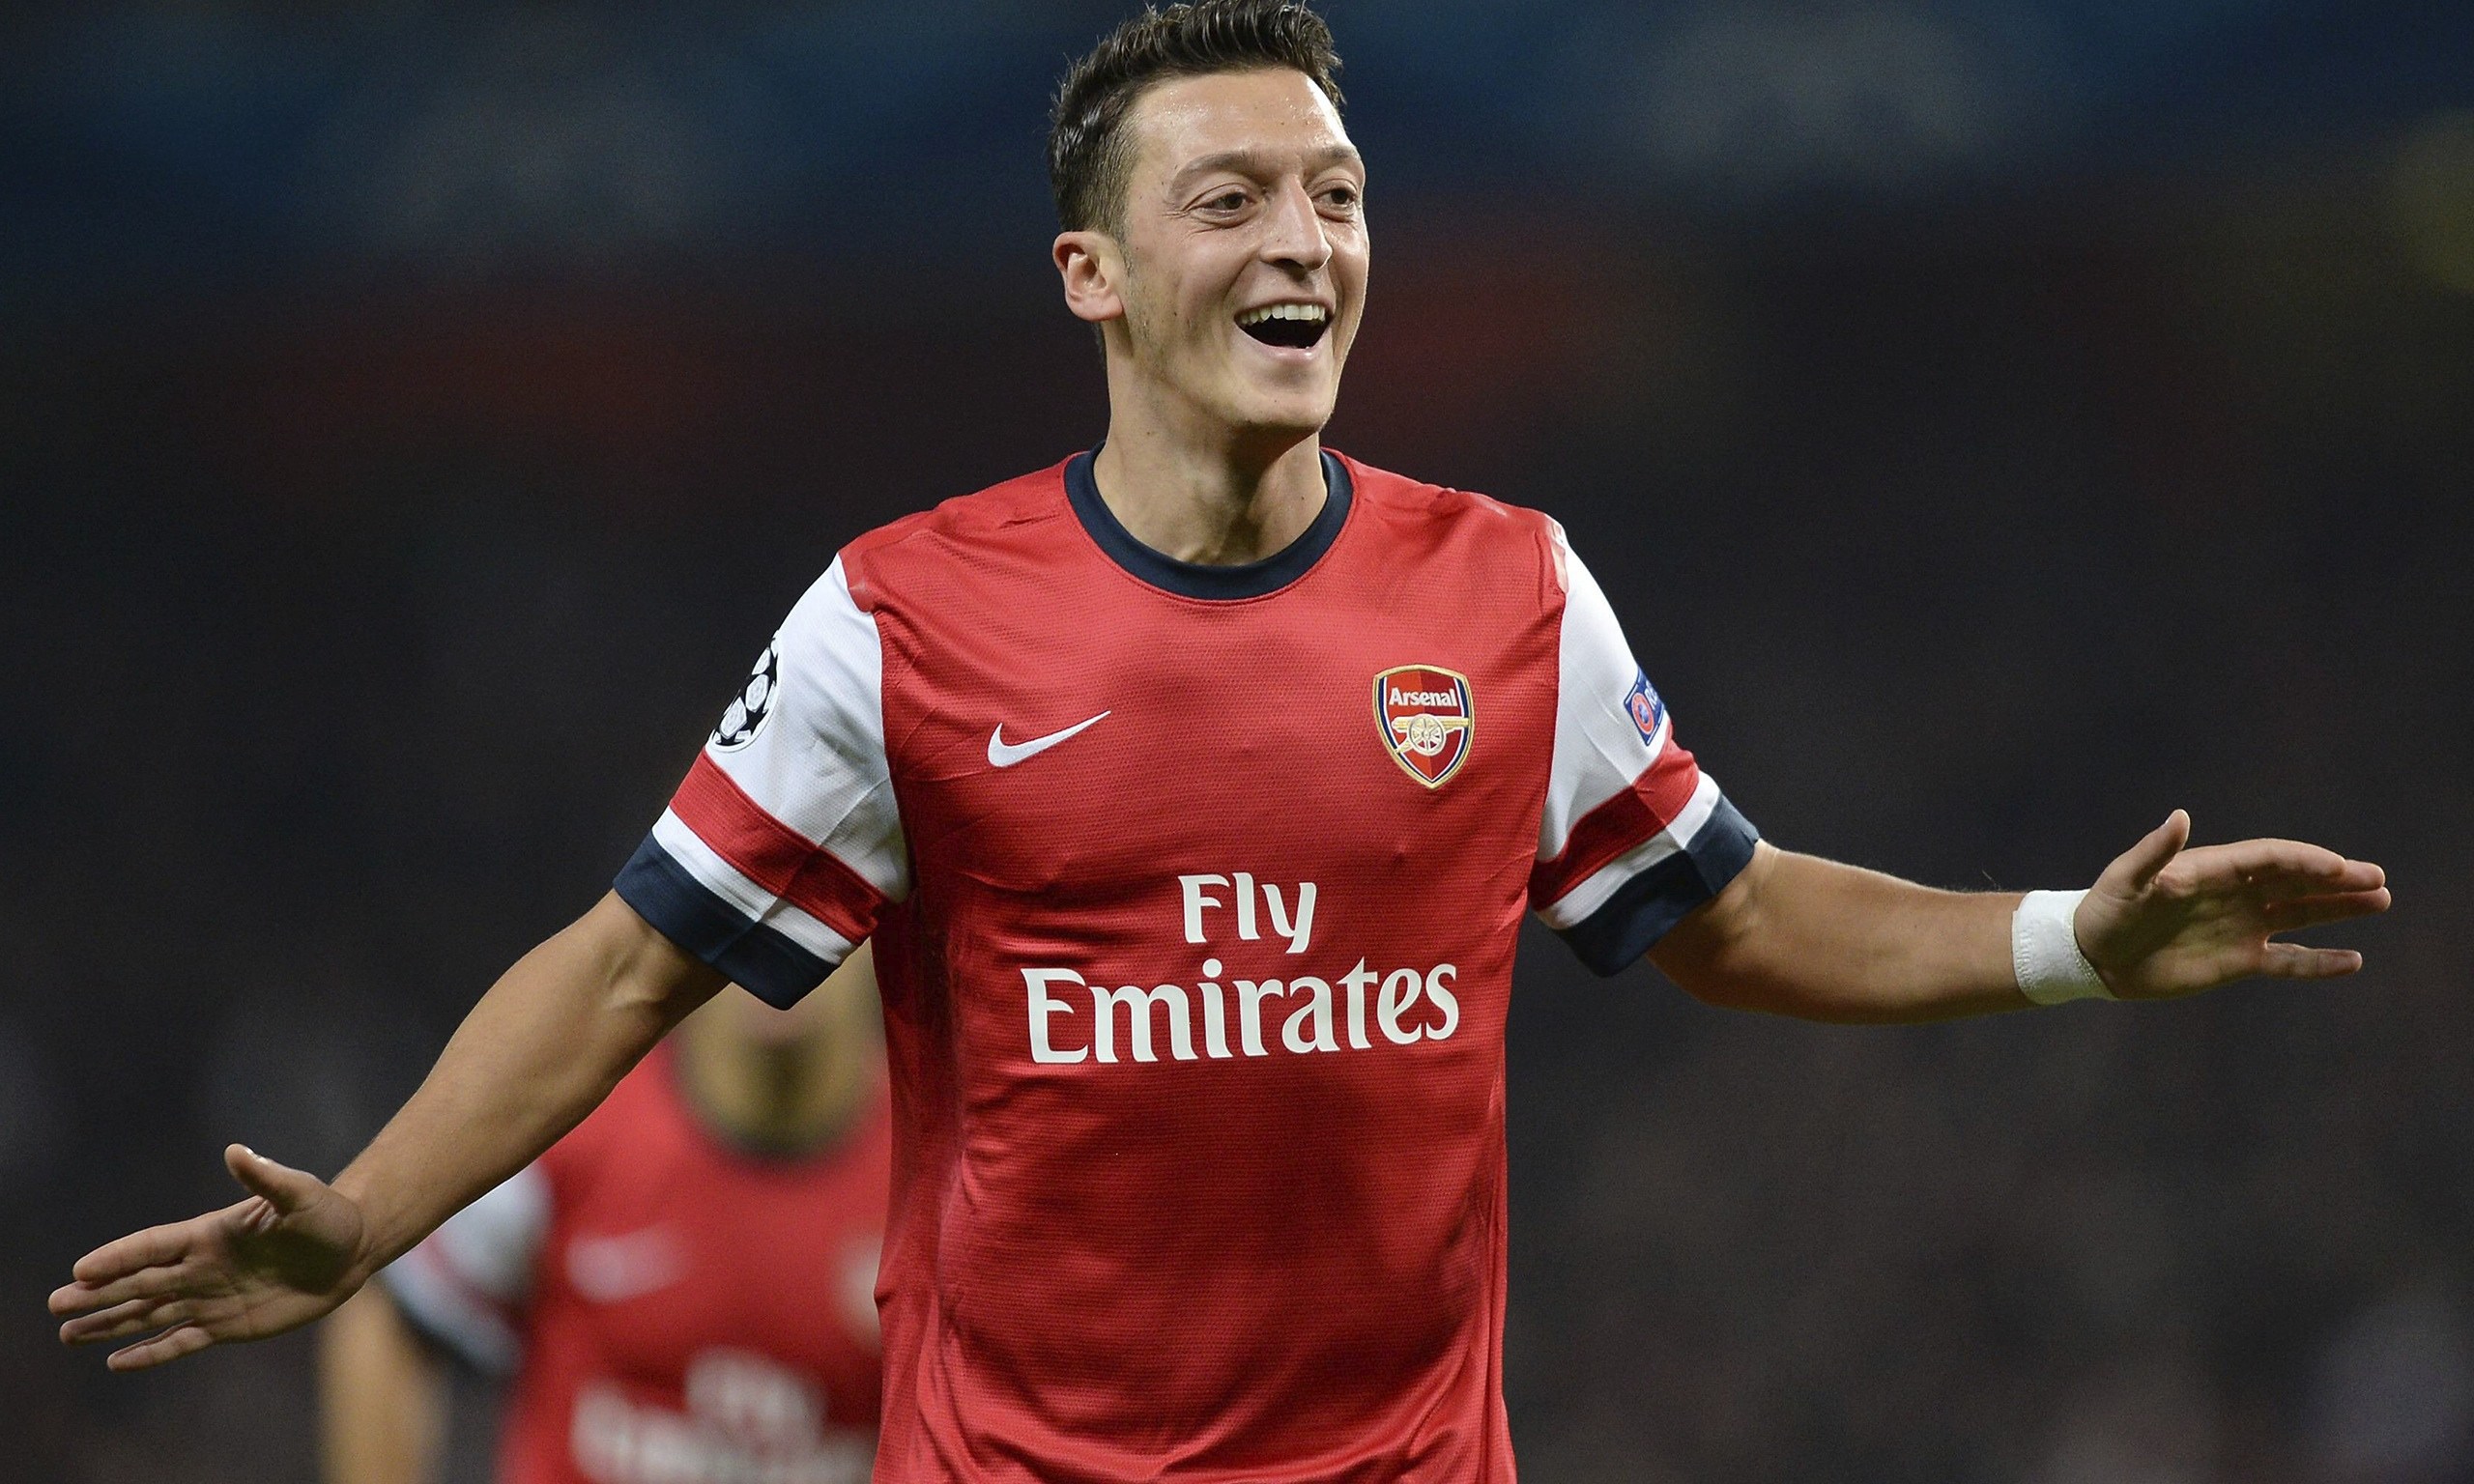 The Player Of Arsenal Mesut Ozil Is Happy After Victory